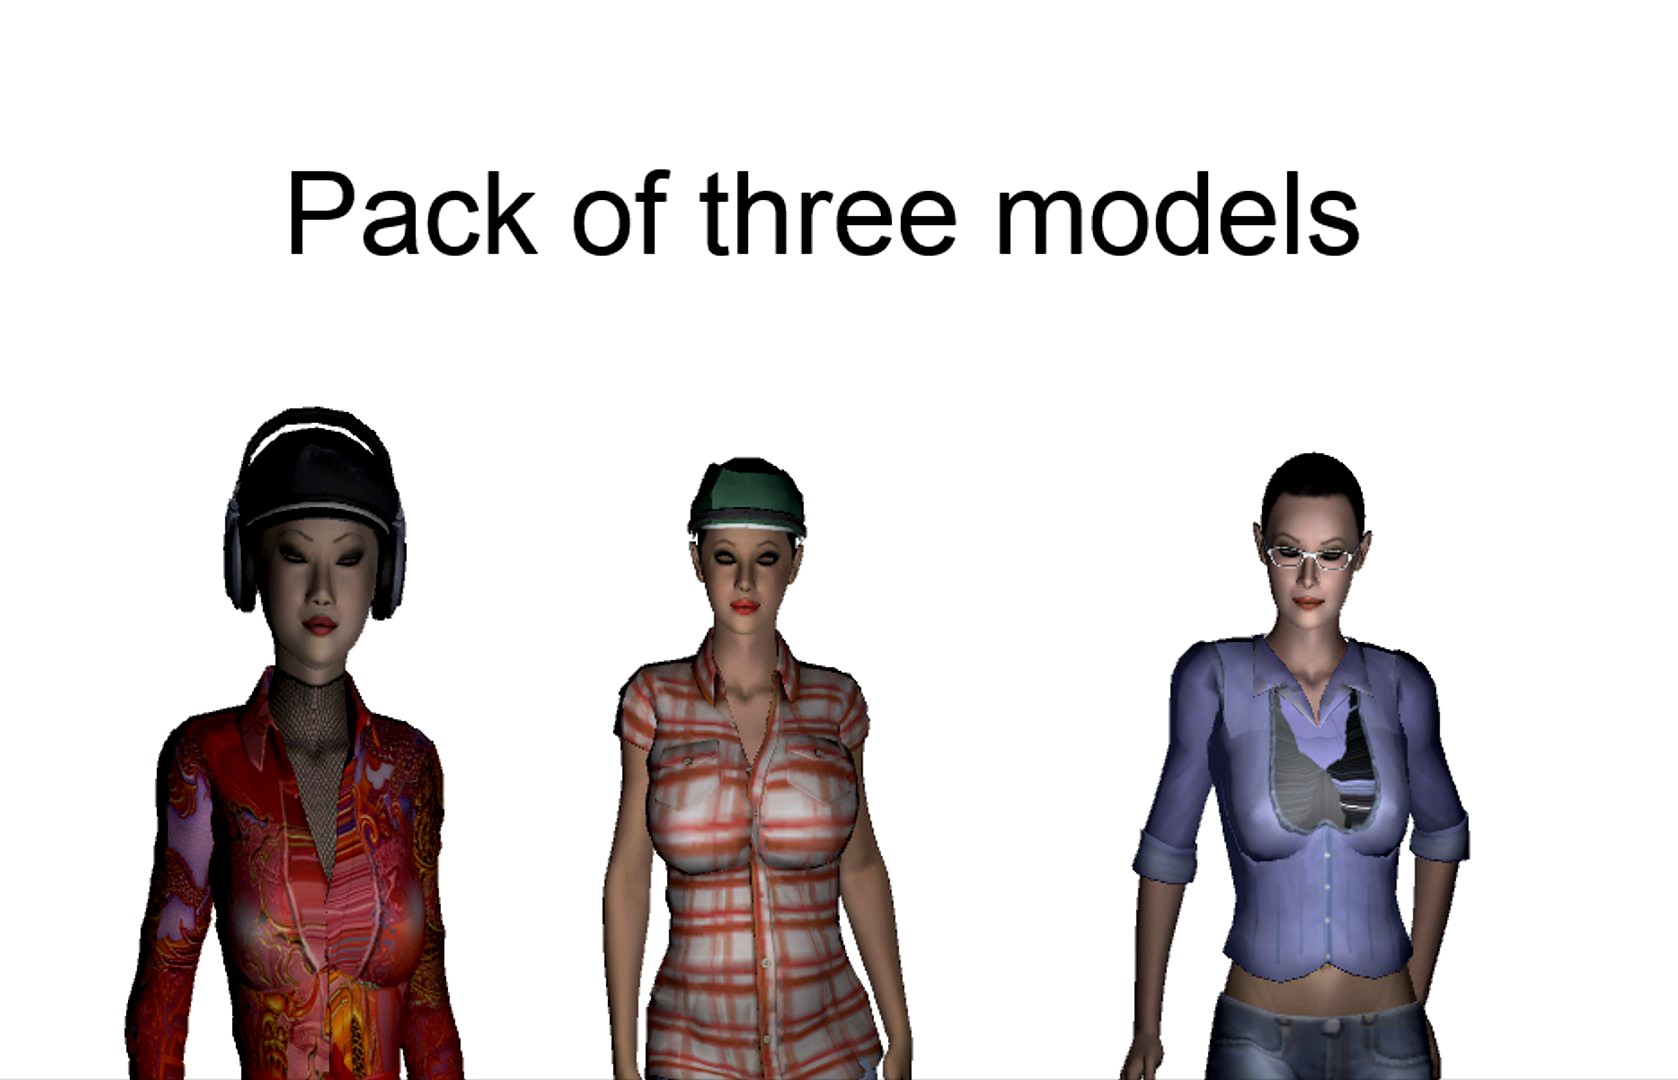 Pack of three models